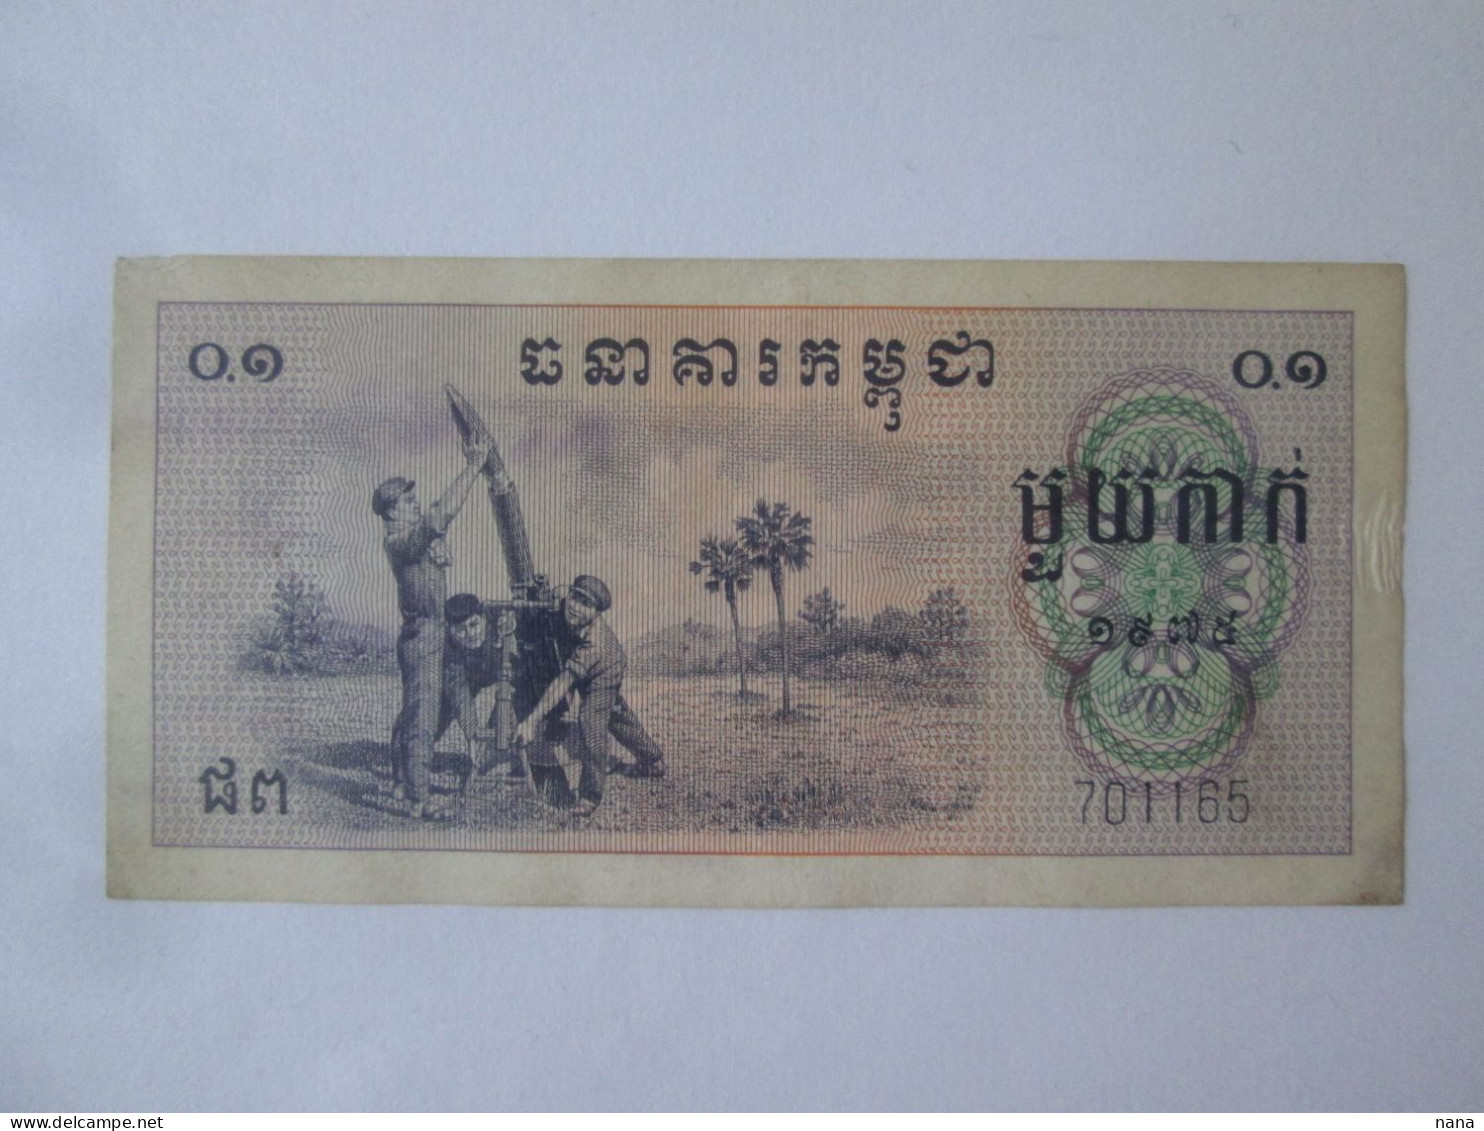 Rare! Cambodia 0.1 Riel 1975 Banknote Khmer Rouge Regime Pol Pot See Pictures - Cambodia